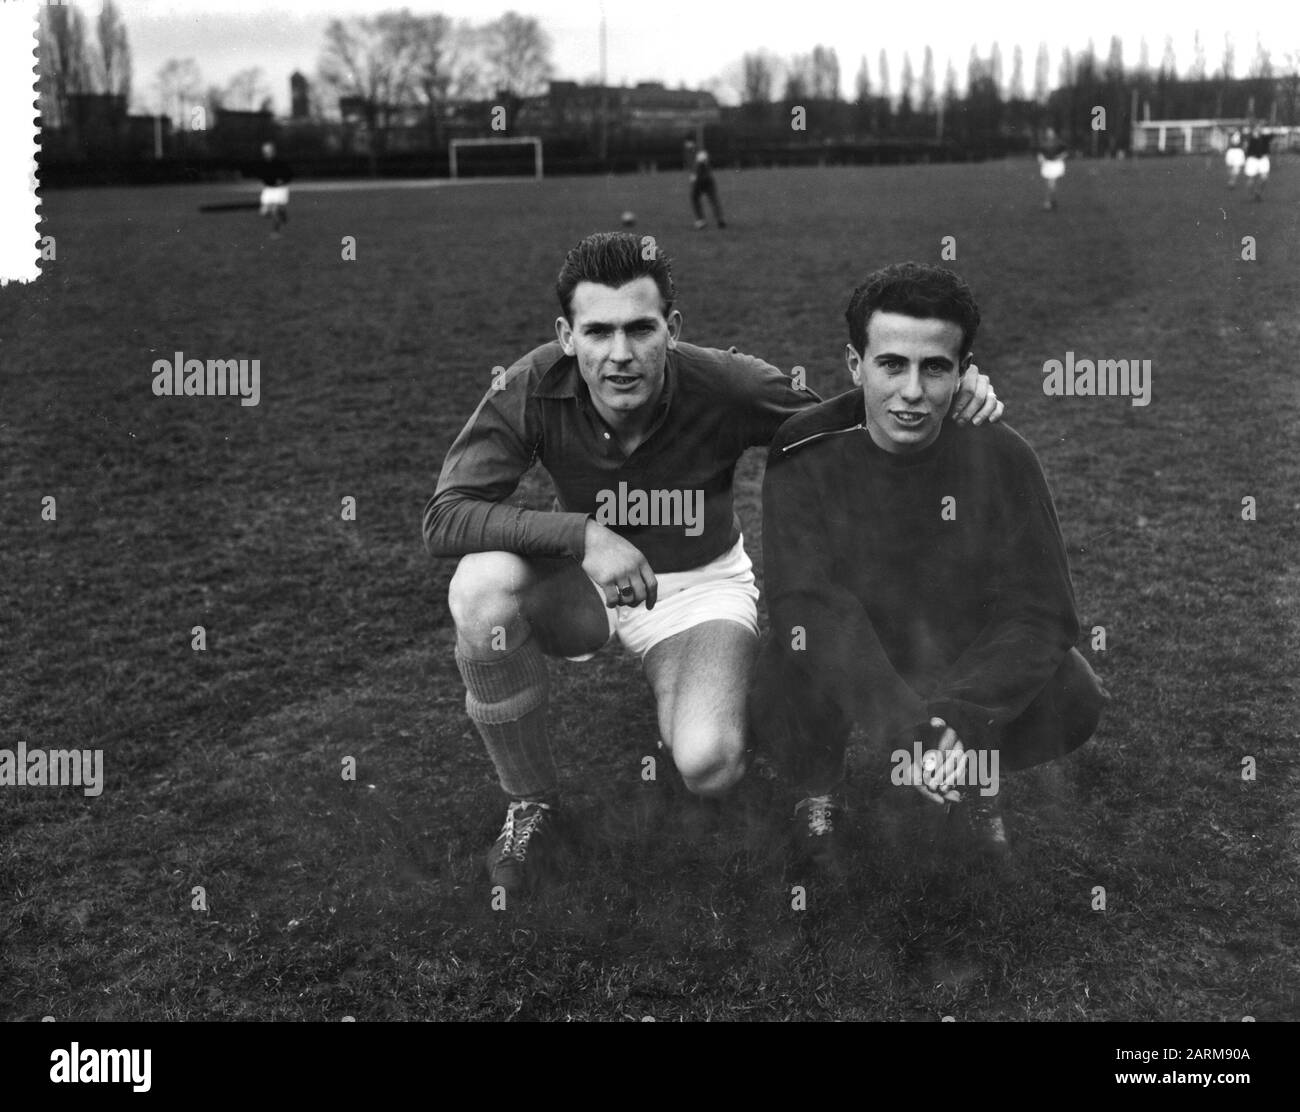 Voeballers: Leo Canjels (left) and French Architect Annotation: Both played for NAC from Breda.Leo Canjels was (for the 2nd time) selected for the Dutch team and would make his debut in the match against Bulgaria on 10 May 1951, French Architect would also make his debut in an interland against West Germany in a few months later Date: 14 April 1959 Keywords: portraits, sports, football, footballers Personname: Architect, Frans, Canjels, Leo Stock Photo